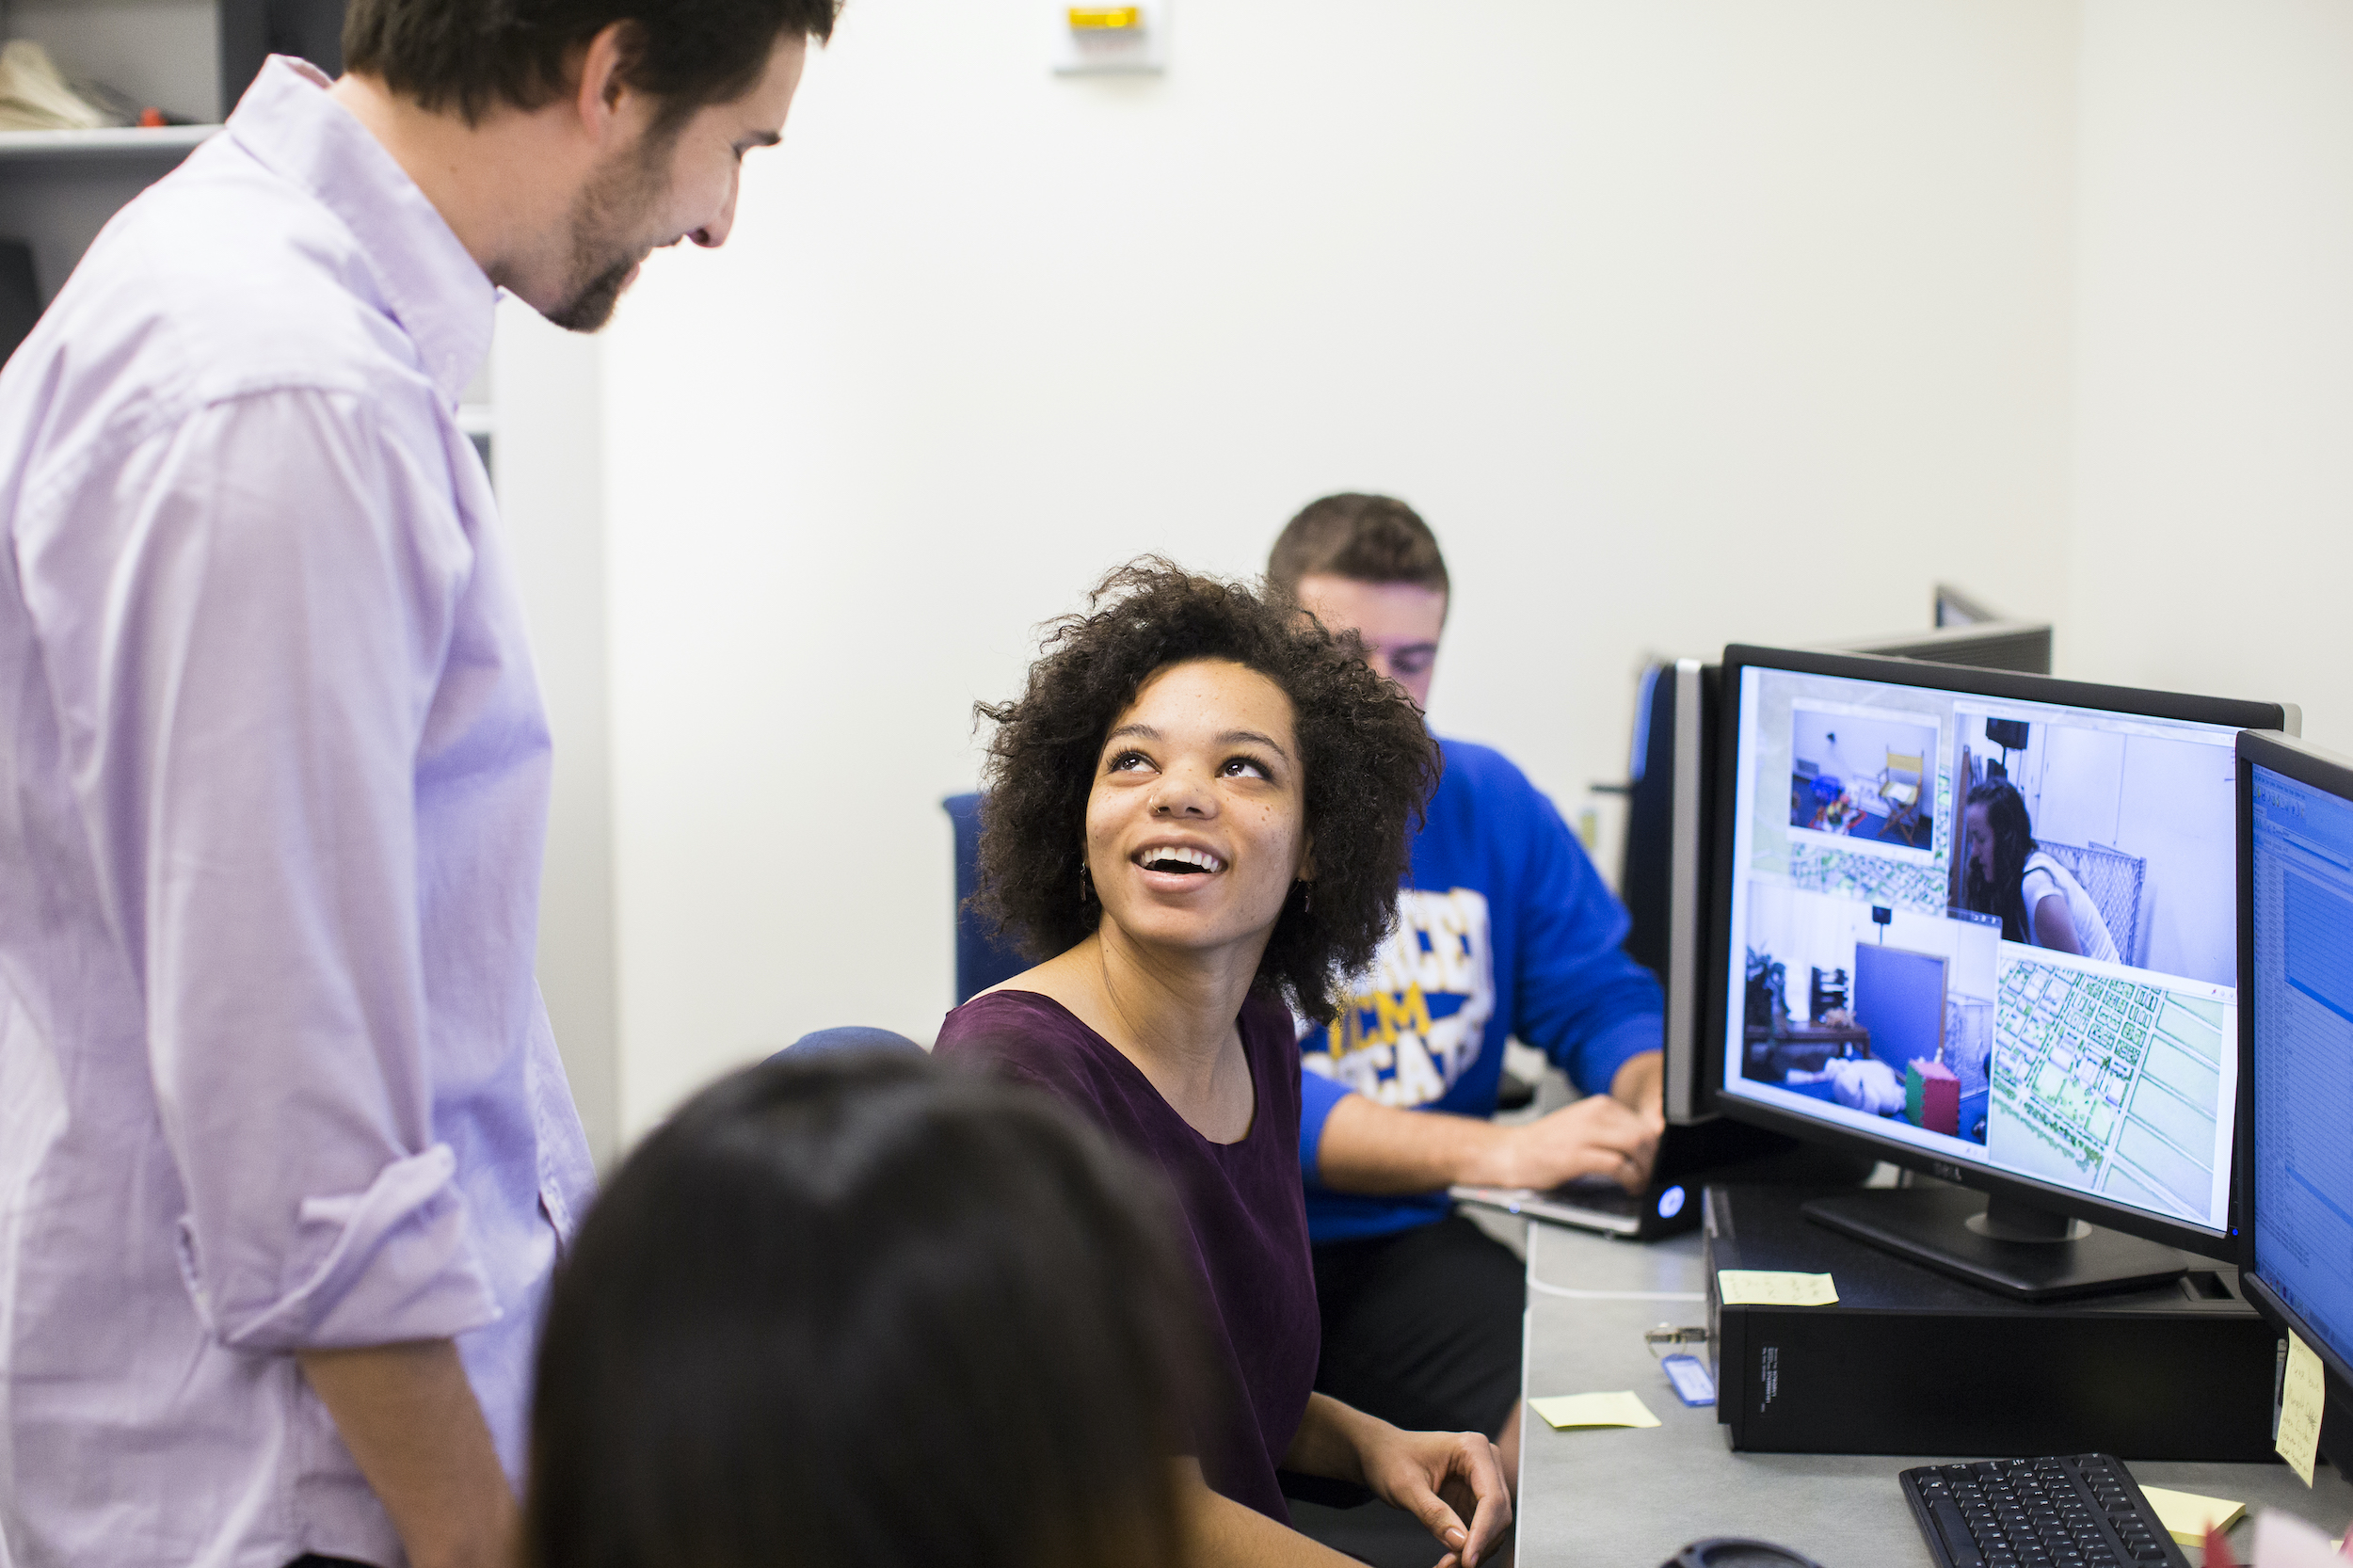 A young woman is sitting in front of a computer. She is looking back towards the camera and smiling. Several other students are working nearby.